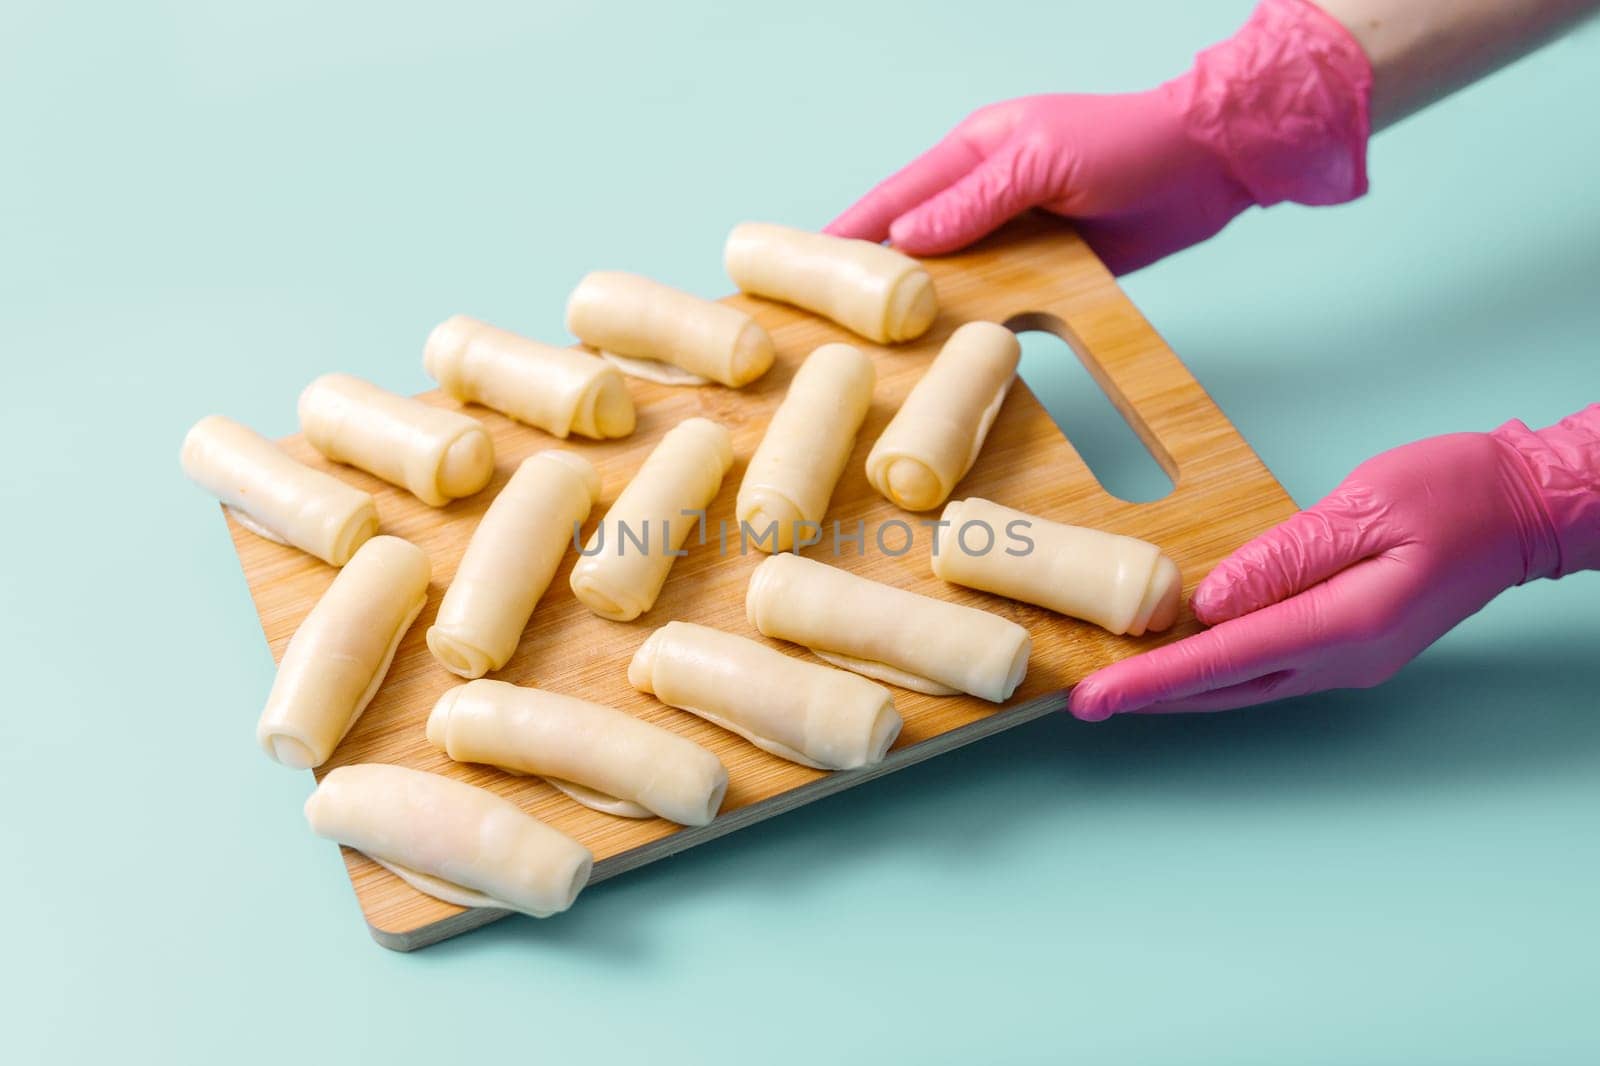 The hands of the pastry chef hold a wooden board on which raw sweet dough rolls lie neatly on a blue background, frozen semi-finished products.